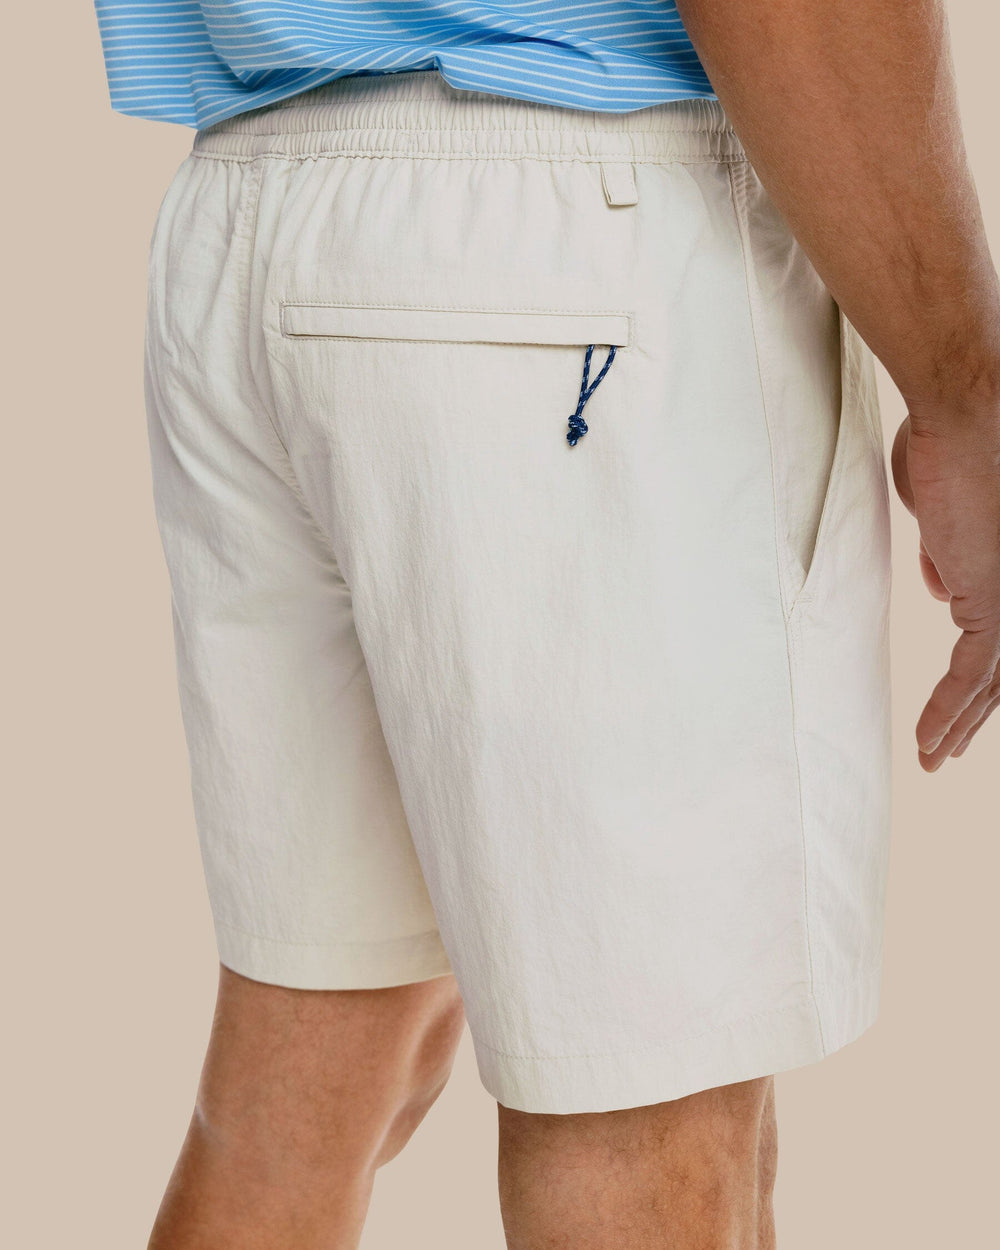 The model side model view of the Men's Shoreline 6 Inch Short by Southern Tide  - Stone